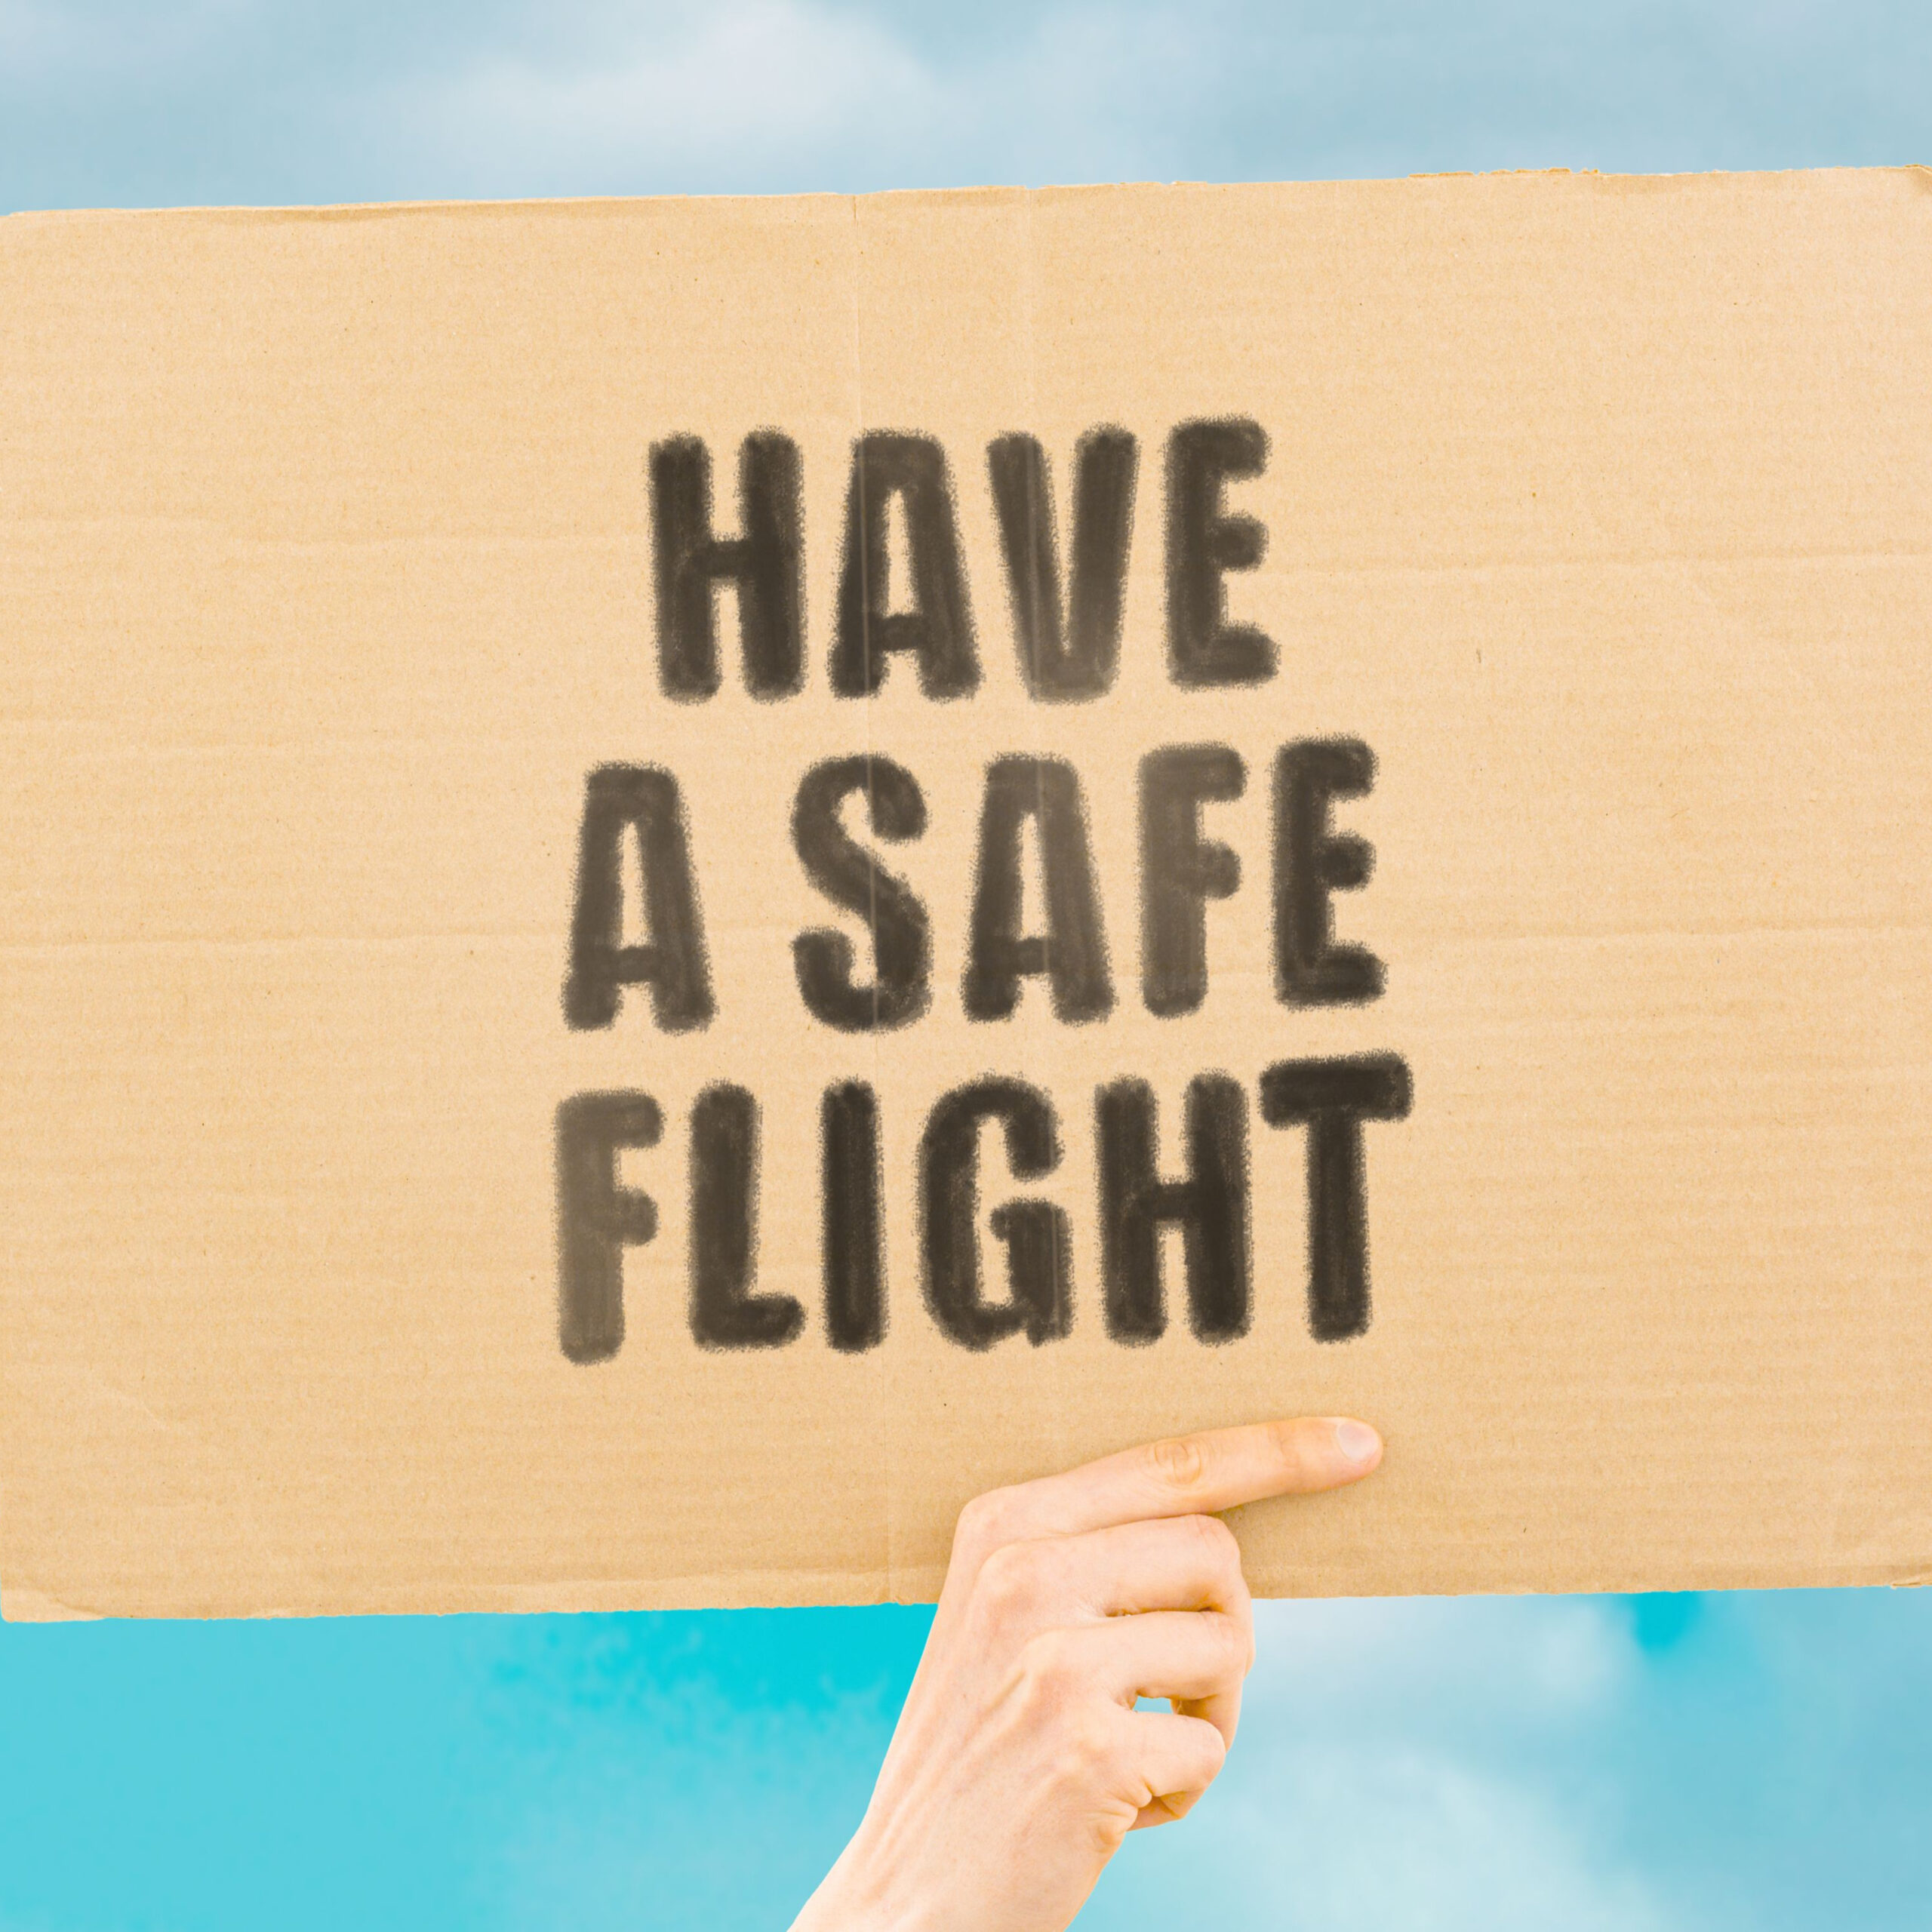 Clever Ways to Say “Have a Safe Flight” to Loved Ones